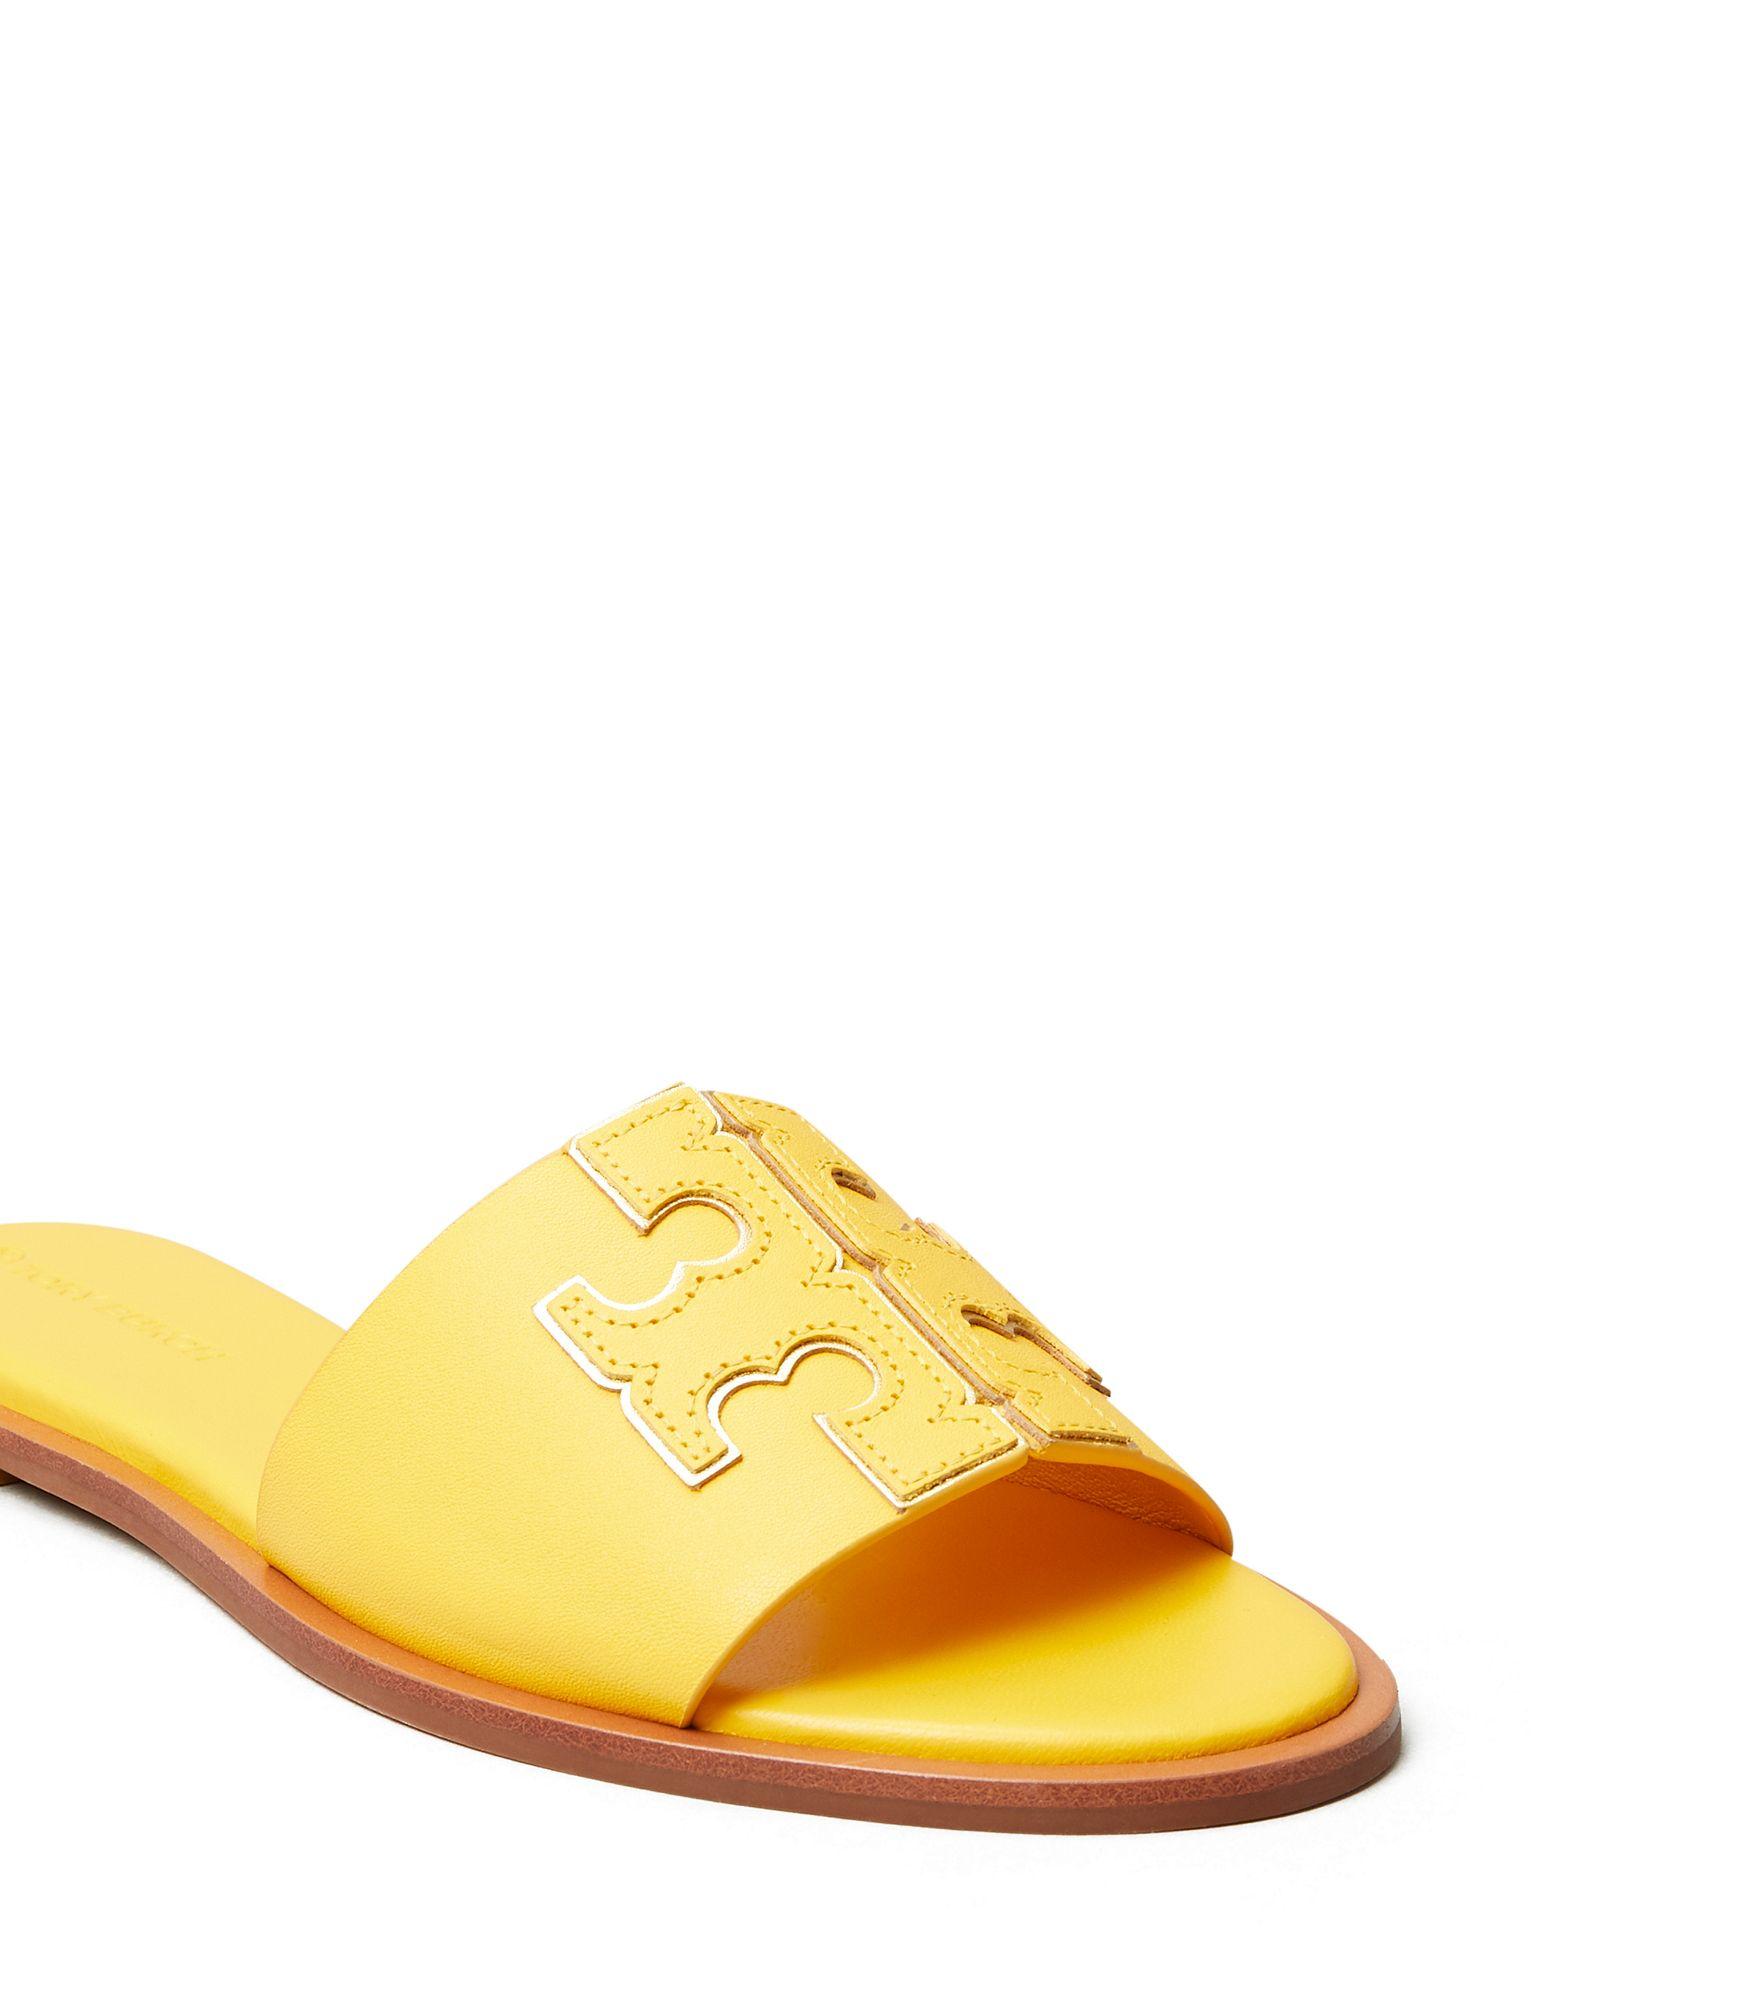 Tory Burch Ines Slide in Yellow - Lyst